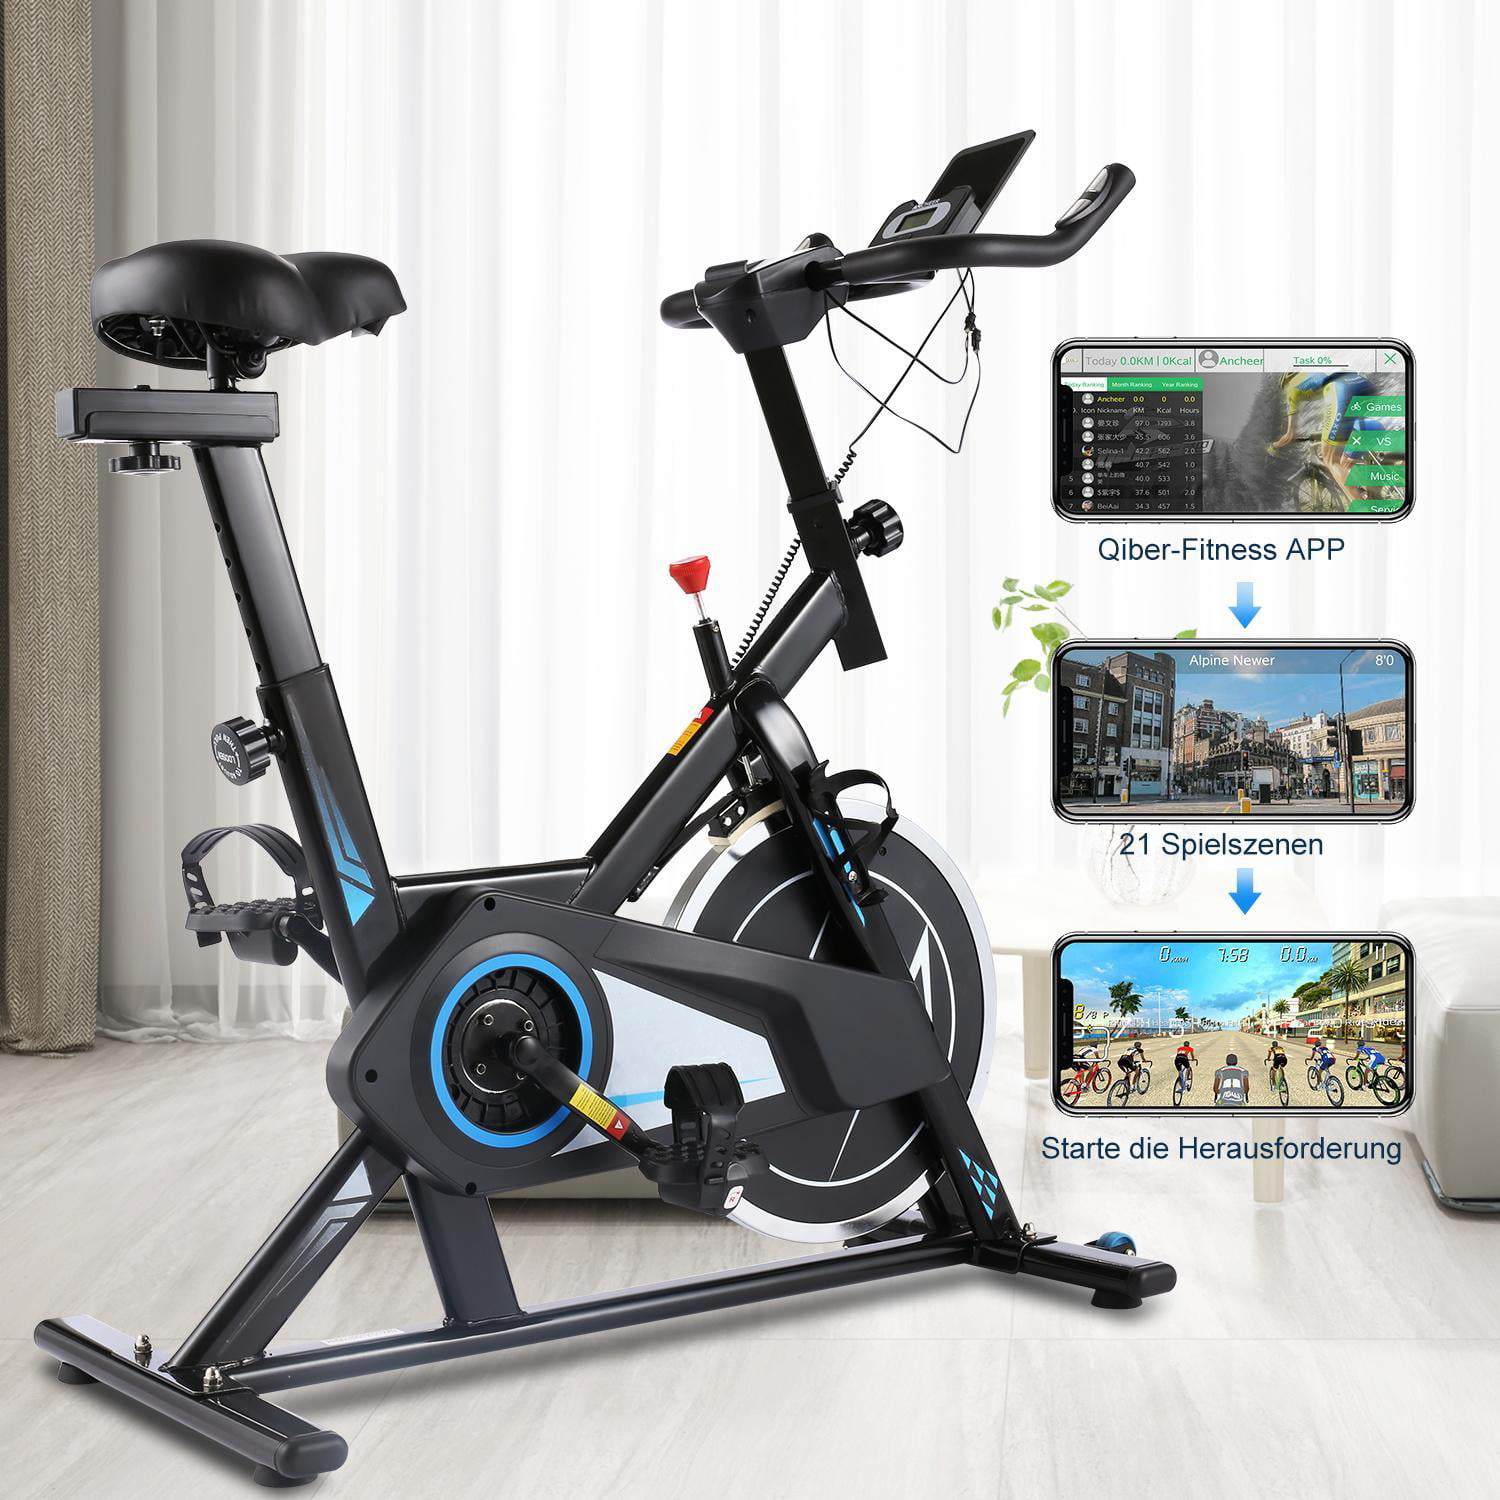 Details about   ANCHEER Stationary Exercise Bike Indoor Cycling Bike 40lb Flywheel Belt Drive 